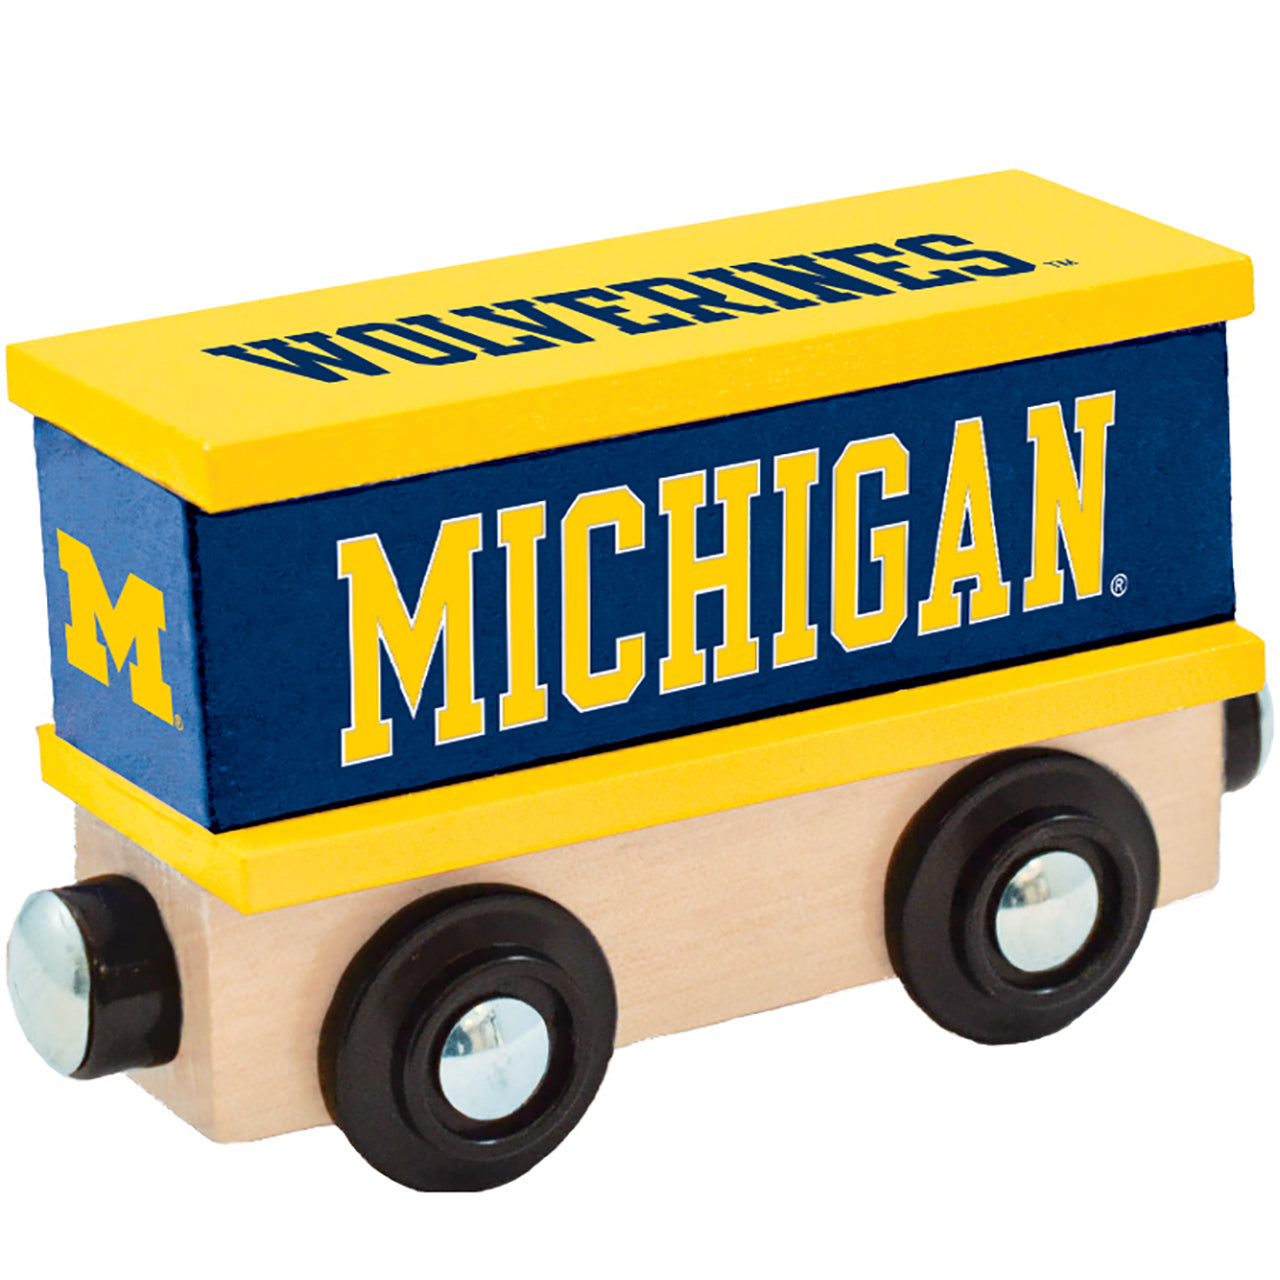 Michigan Wolverines Wooden Boxed Car Train by Masterpieces